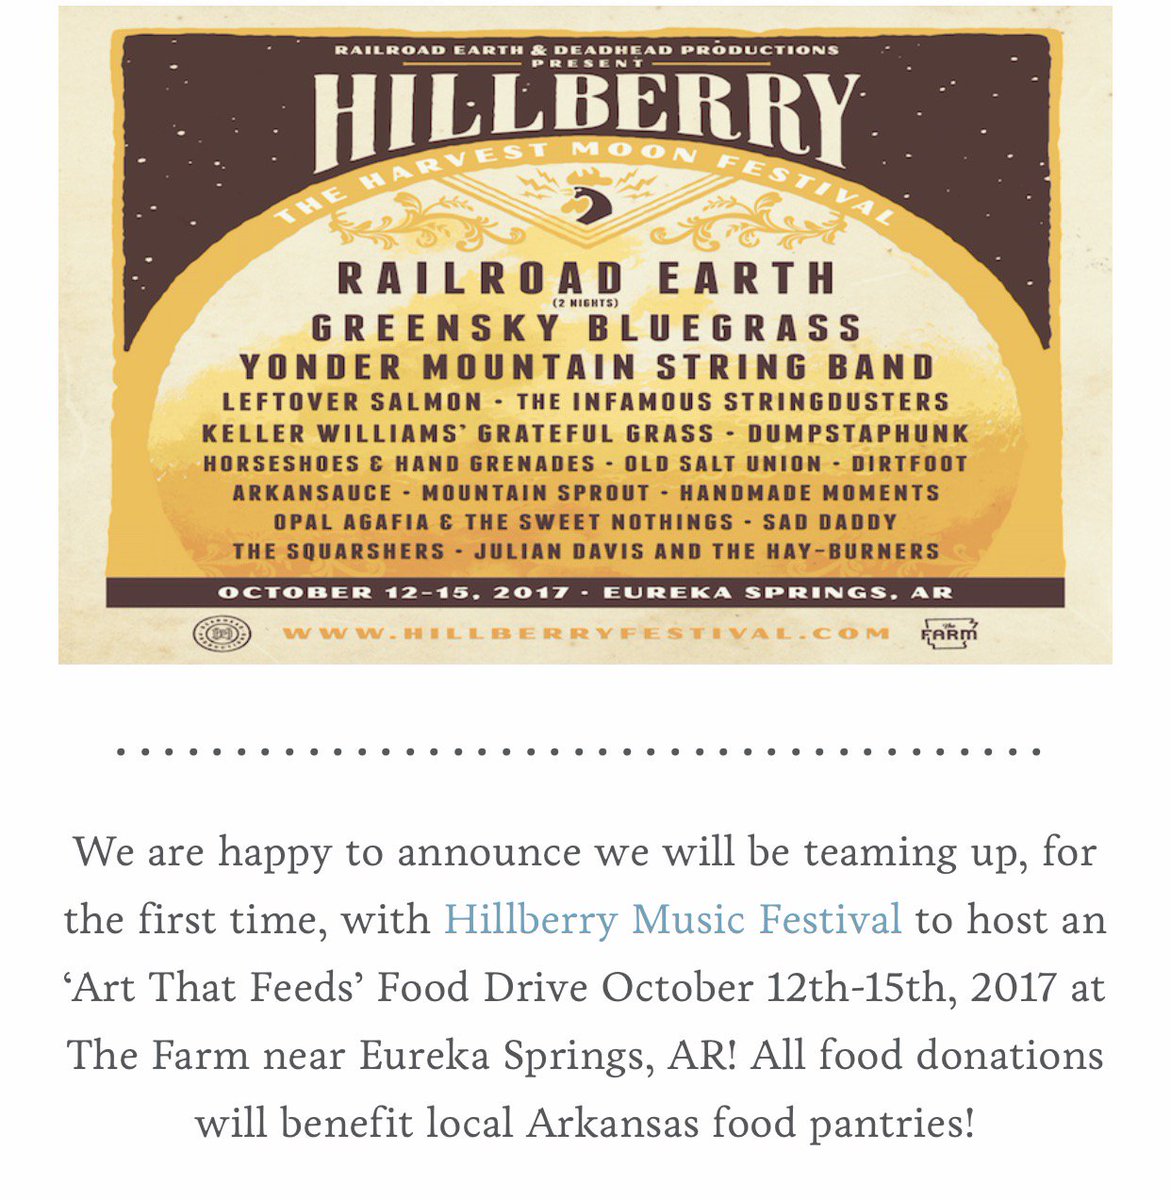 We are thrilled to team up with @consciousalliance for an ‘Art That Feeds’ Food Drive at #Hillberry2017 #ConsciousAlliance #DHP